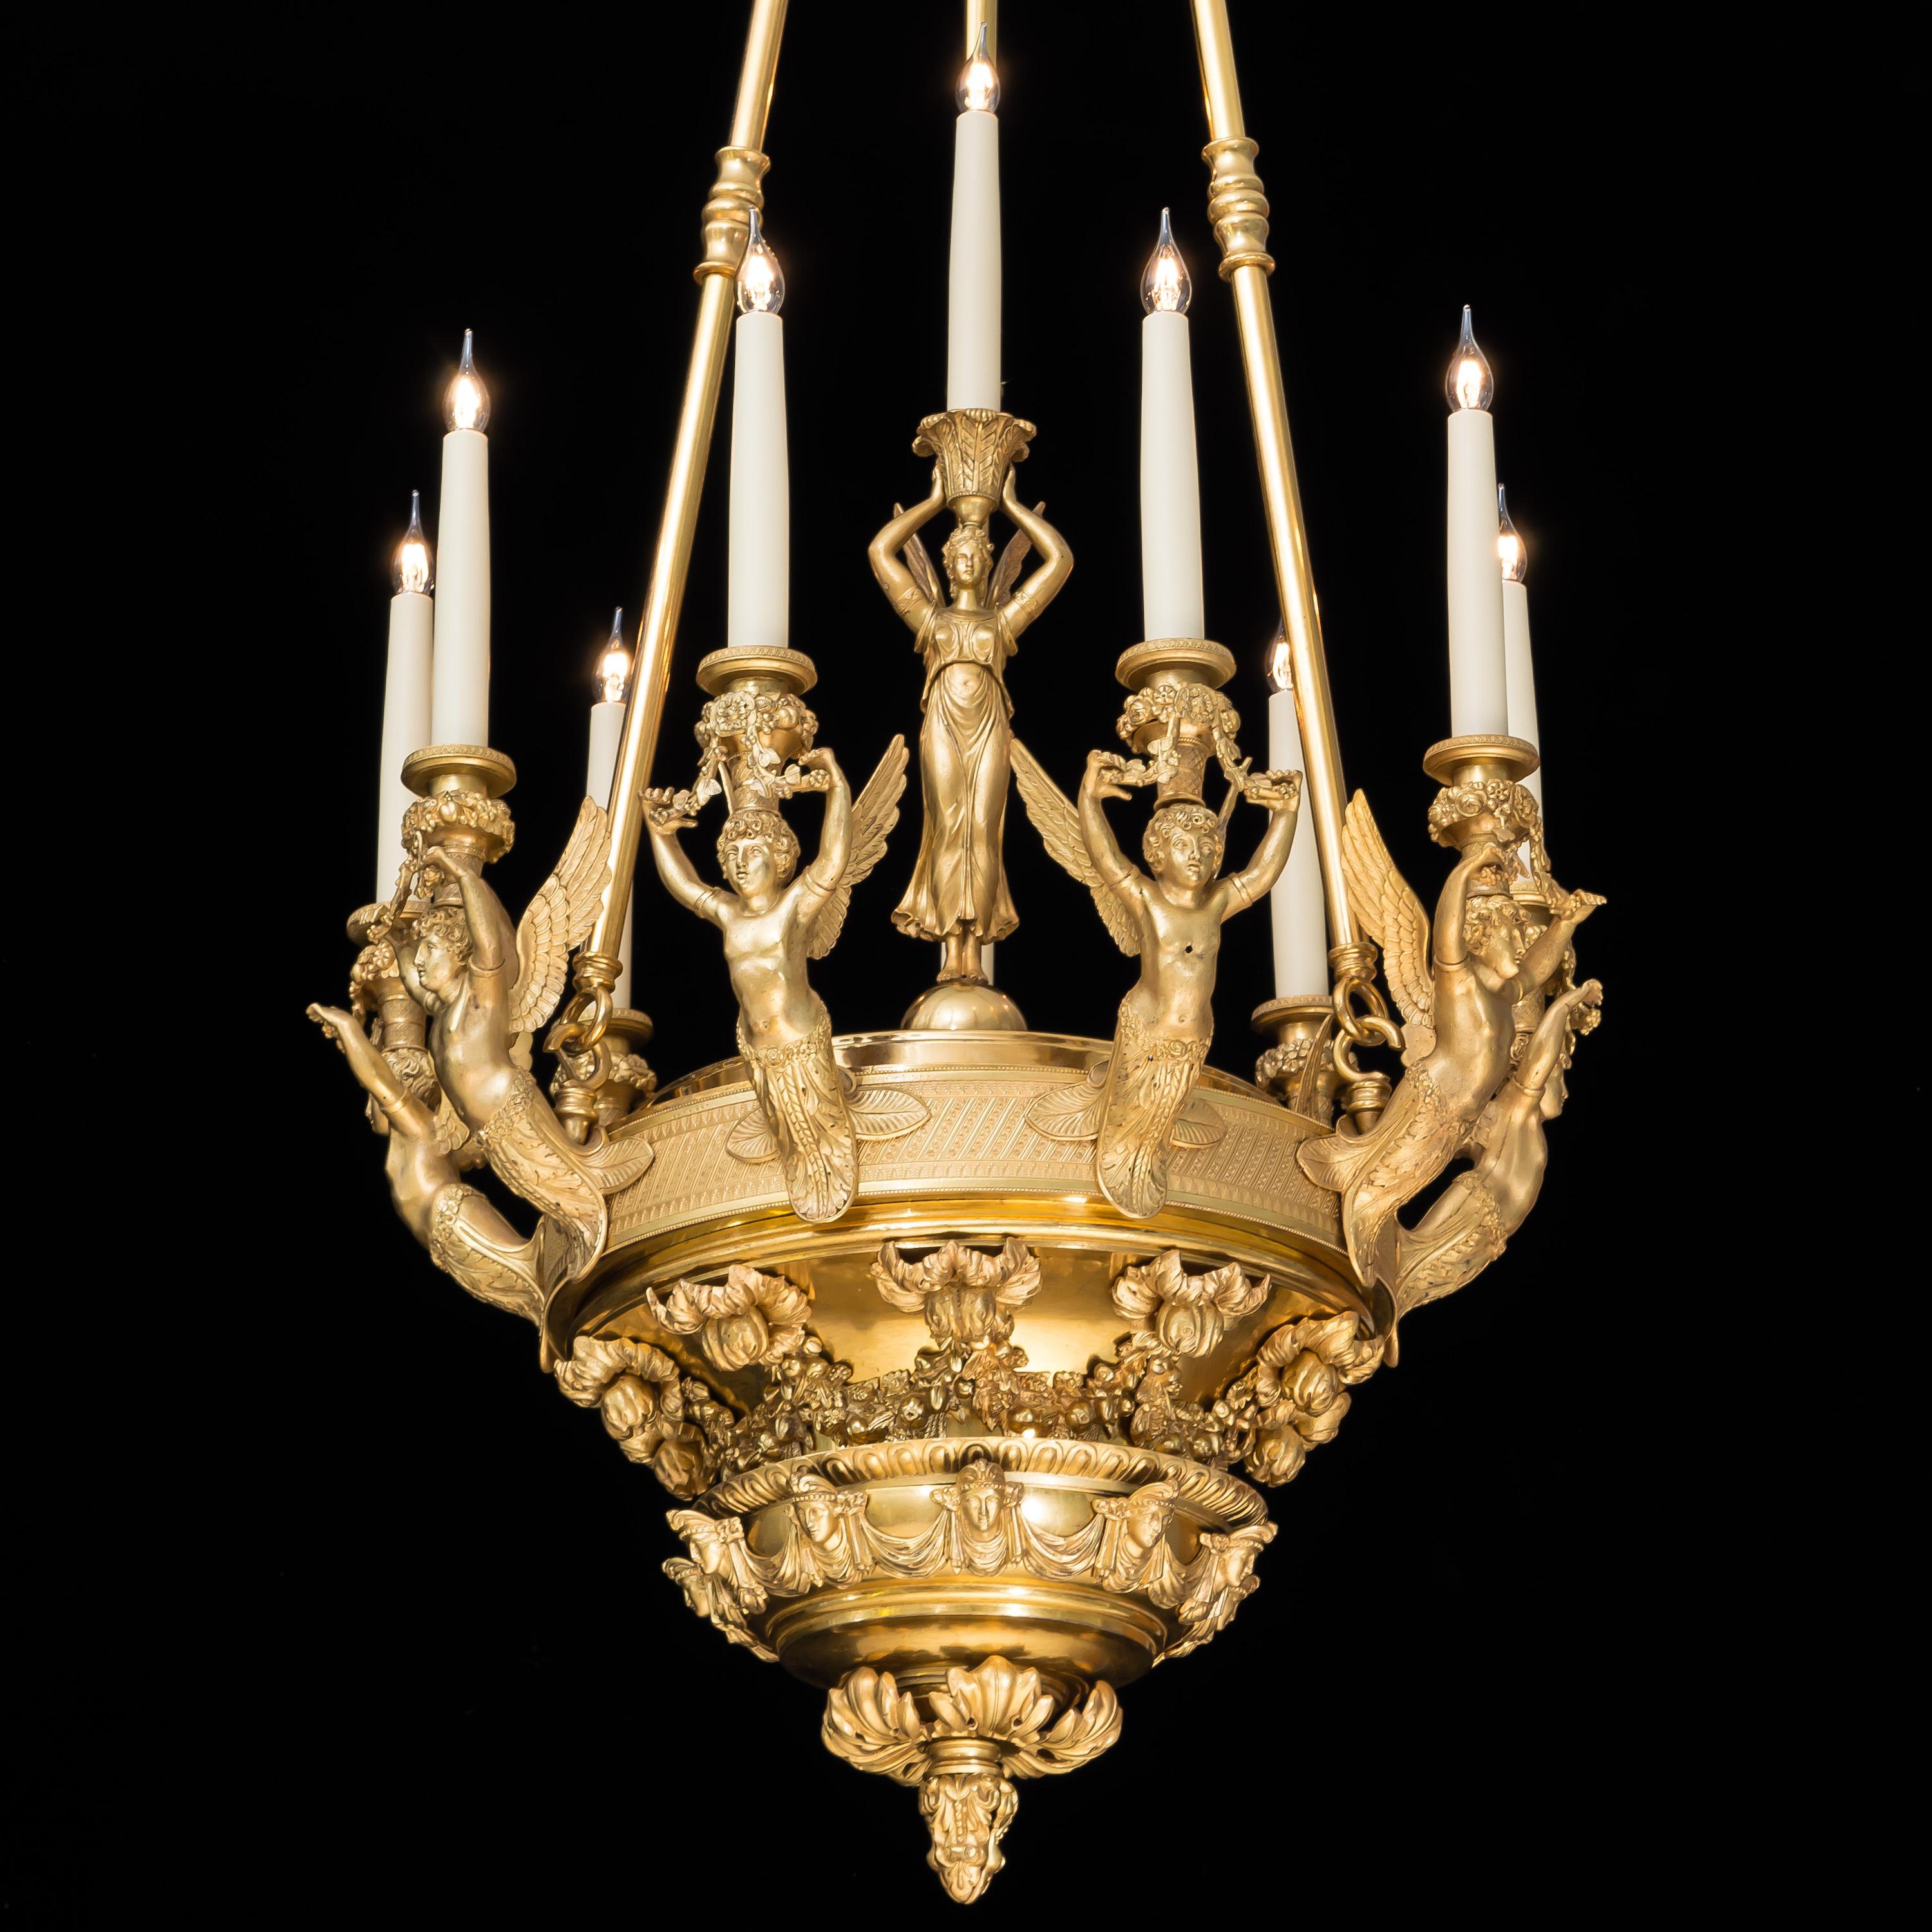 Empire Revival Antique French Empire Style Neoclassical Gilt Bronze 10-Light Chandelier For Sale